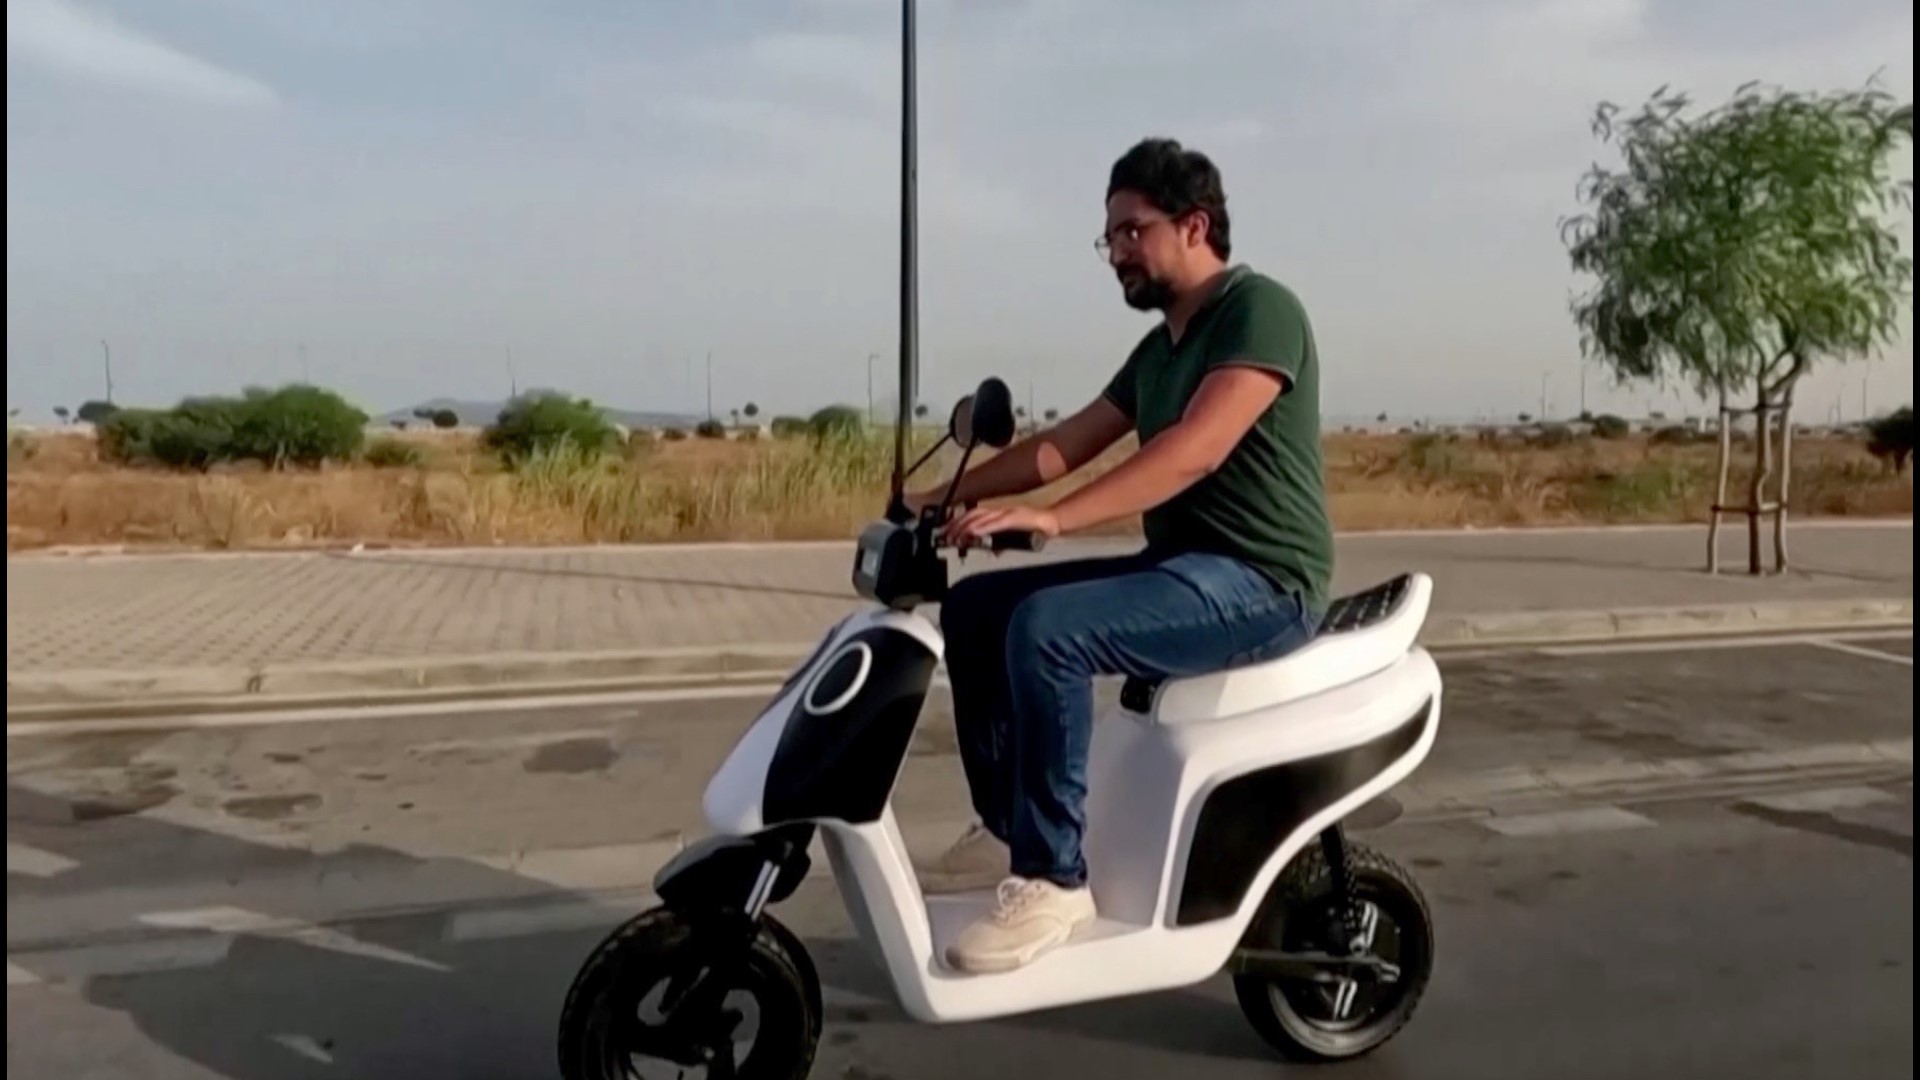 This homegrown e-scooter could change how Tunisians travel. Veuer's Maria Mercedes Galuppo has the story.